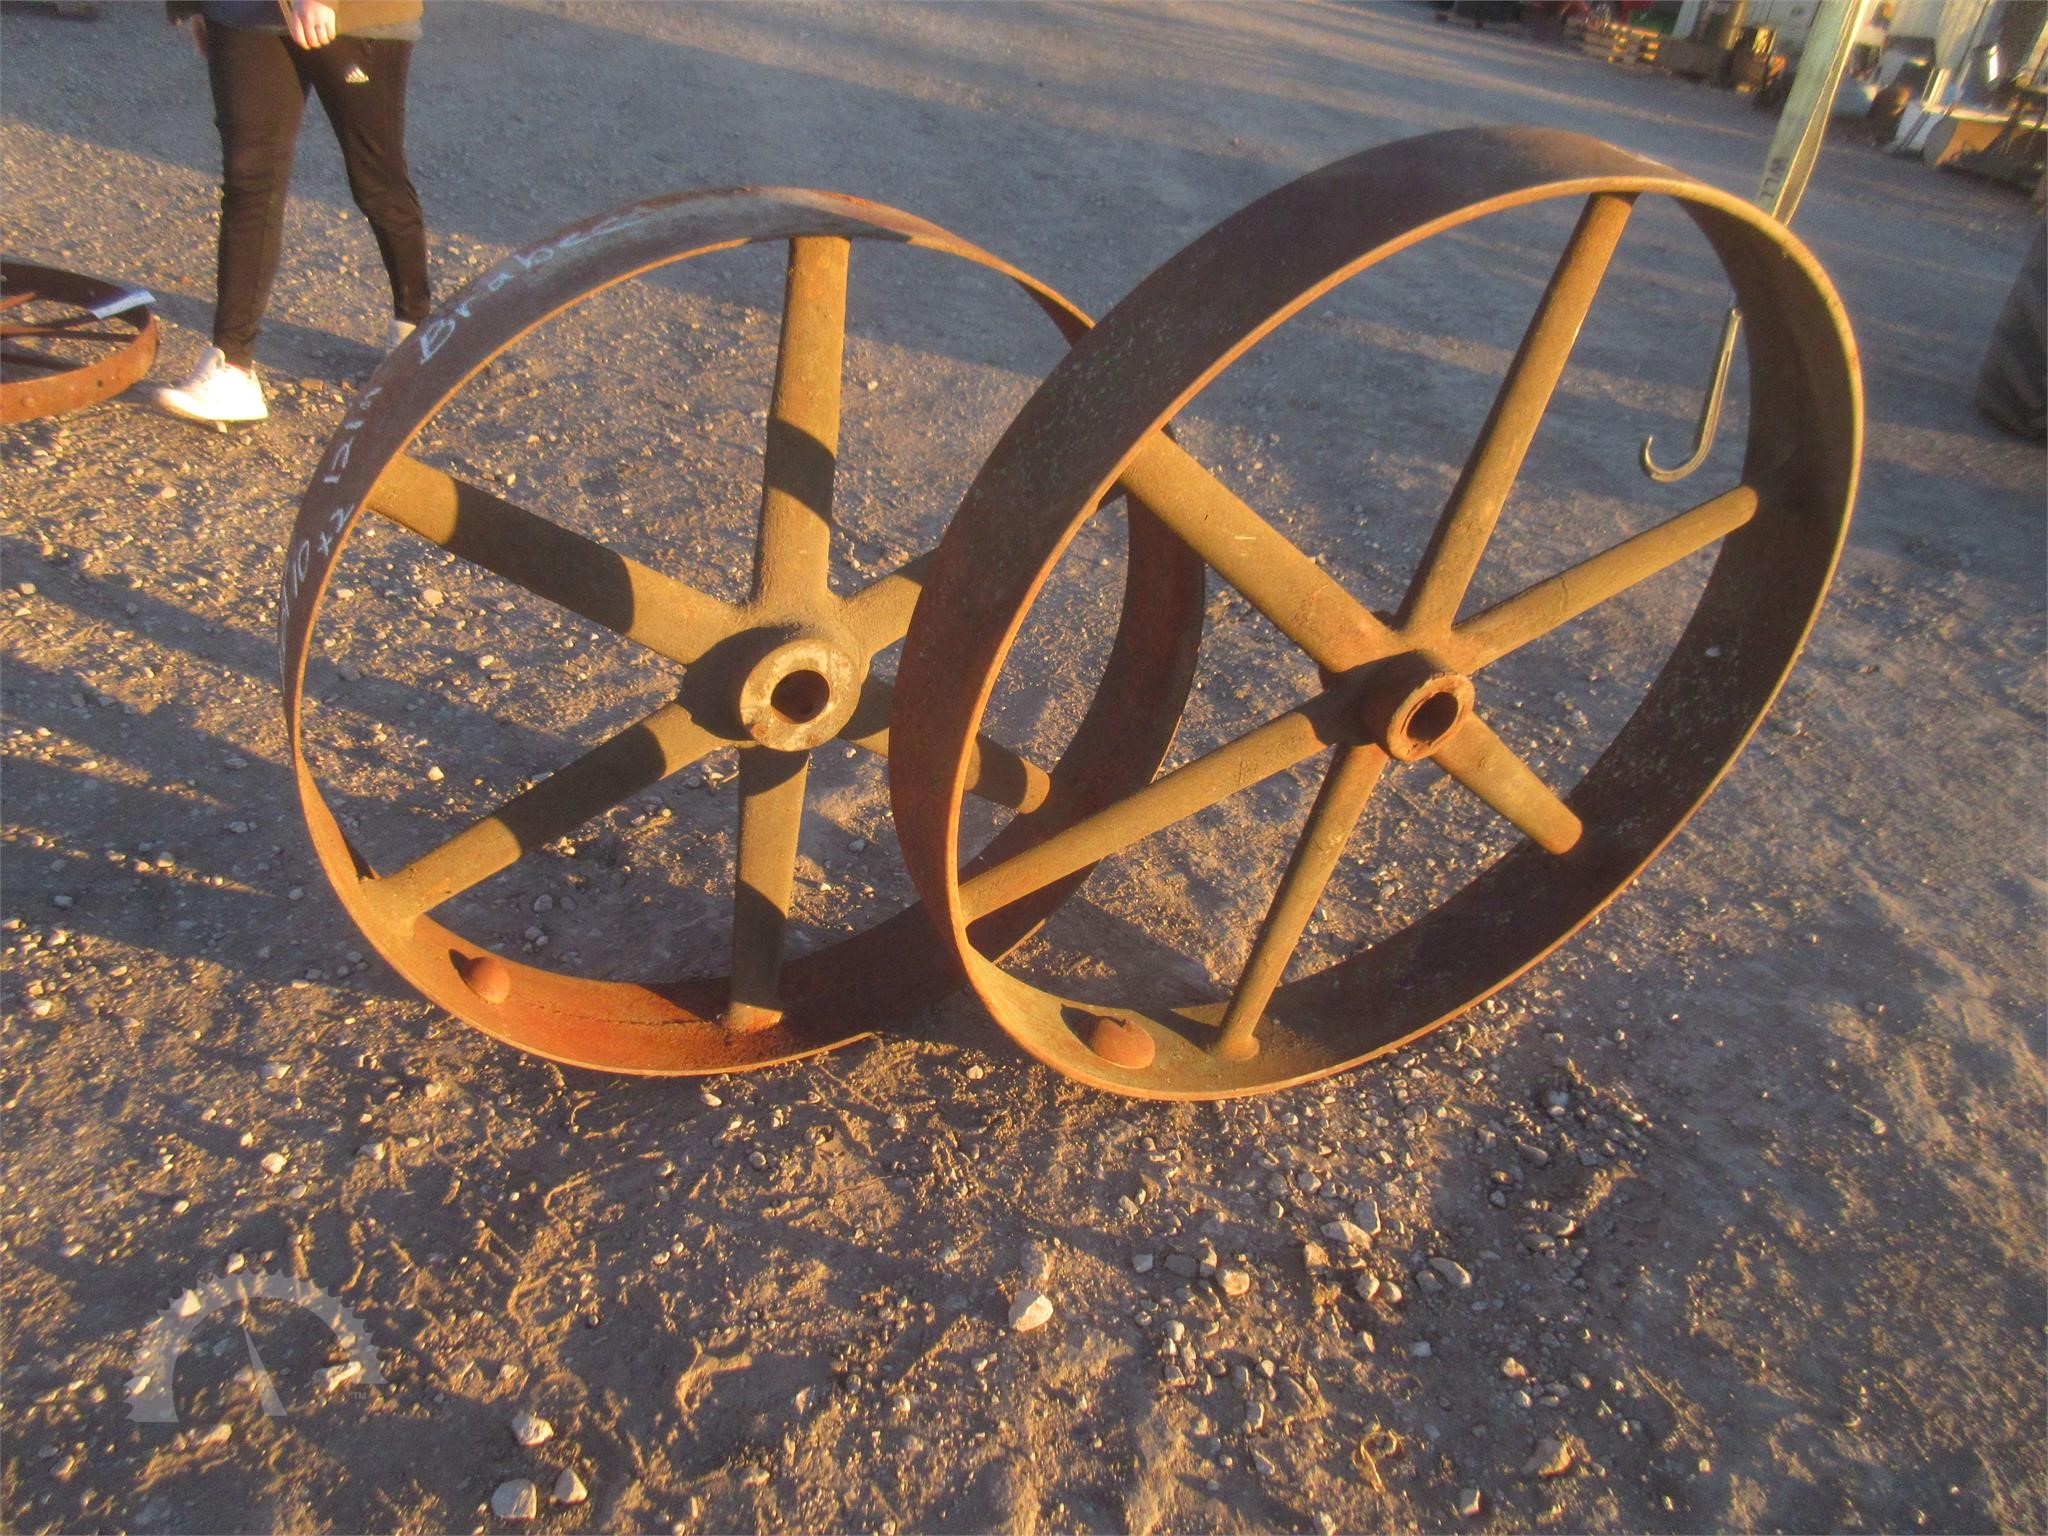 Vint. Craftsman Reel Mower, Second Use Building Materials and Salvage